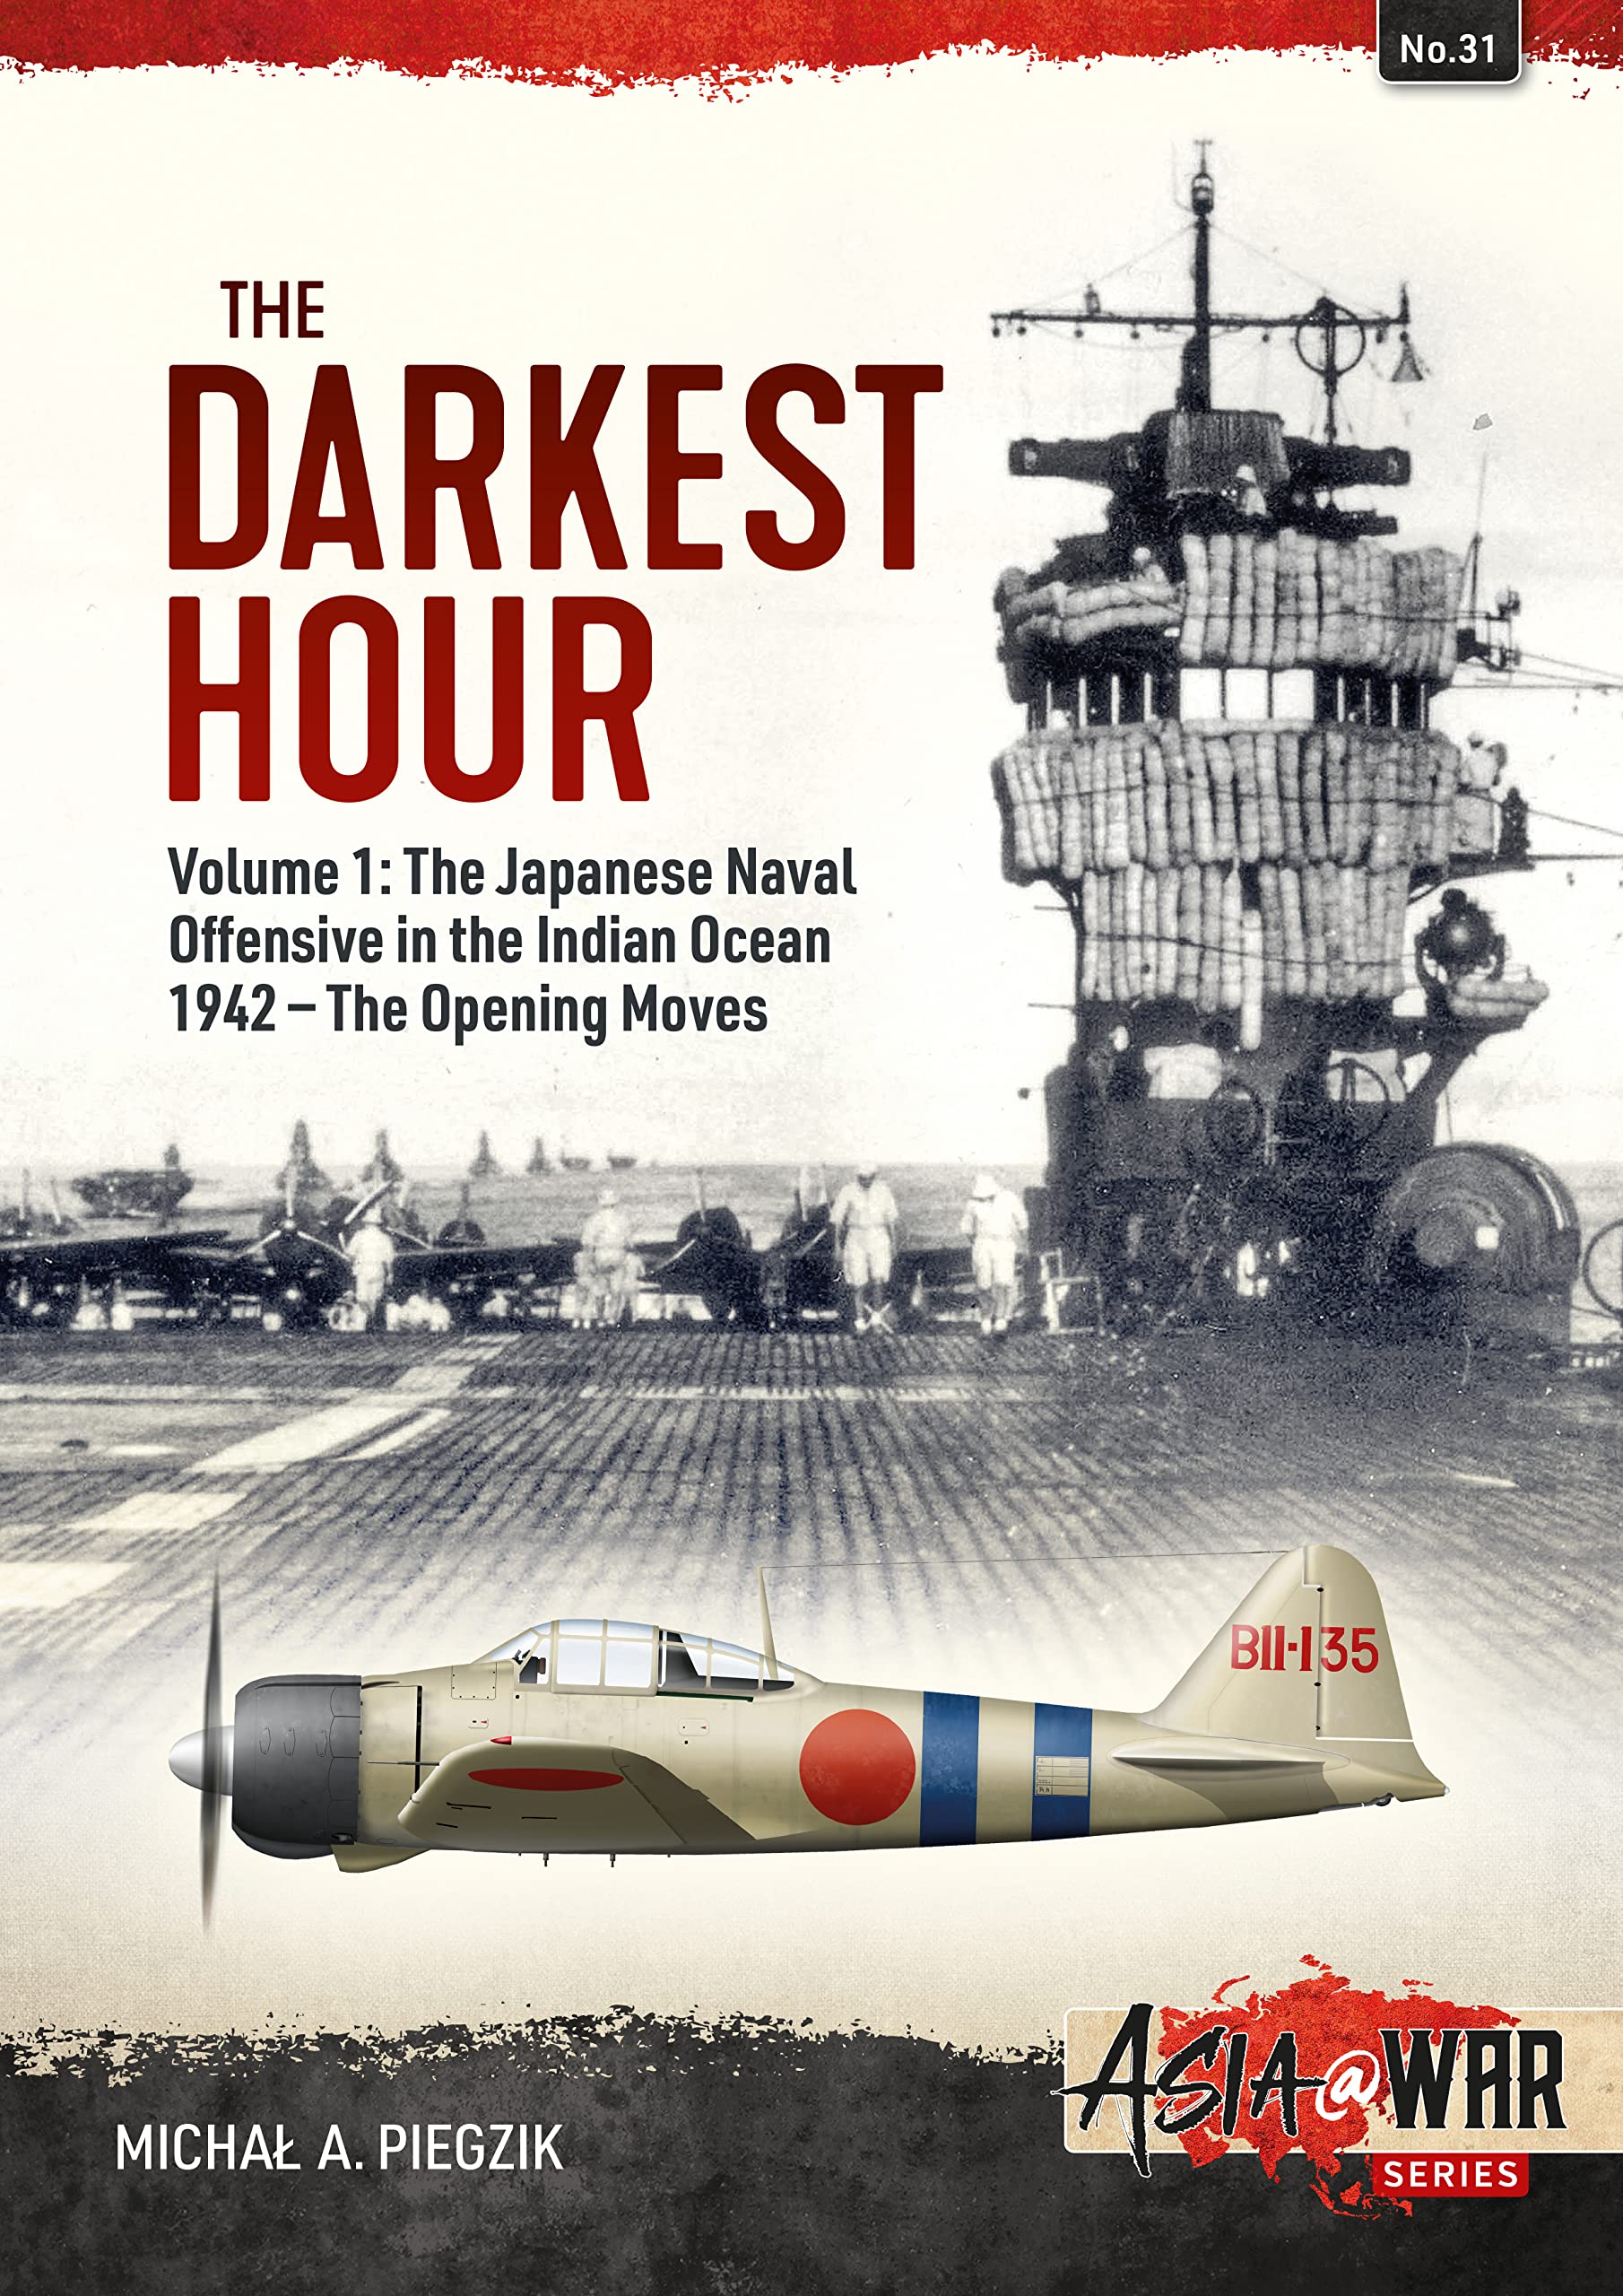 The Darkest Hour, Volume 1: The Japanese Naval Offensive in the